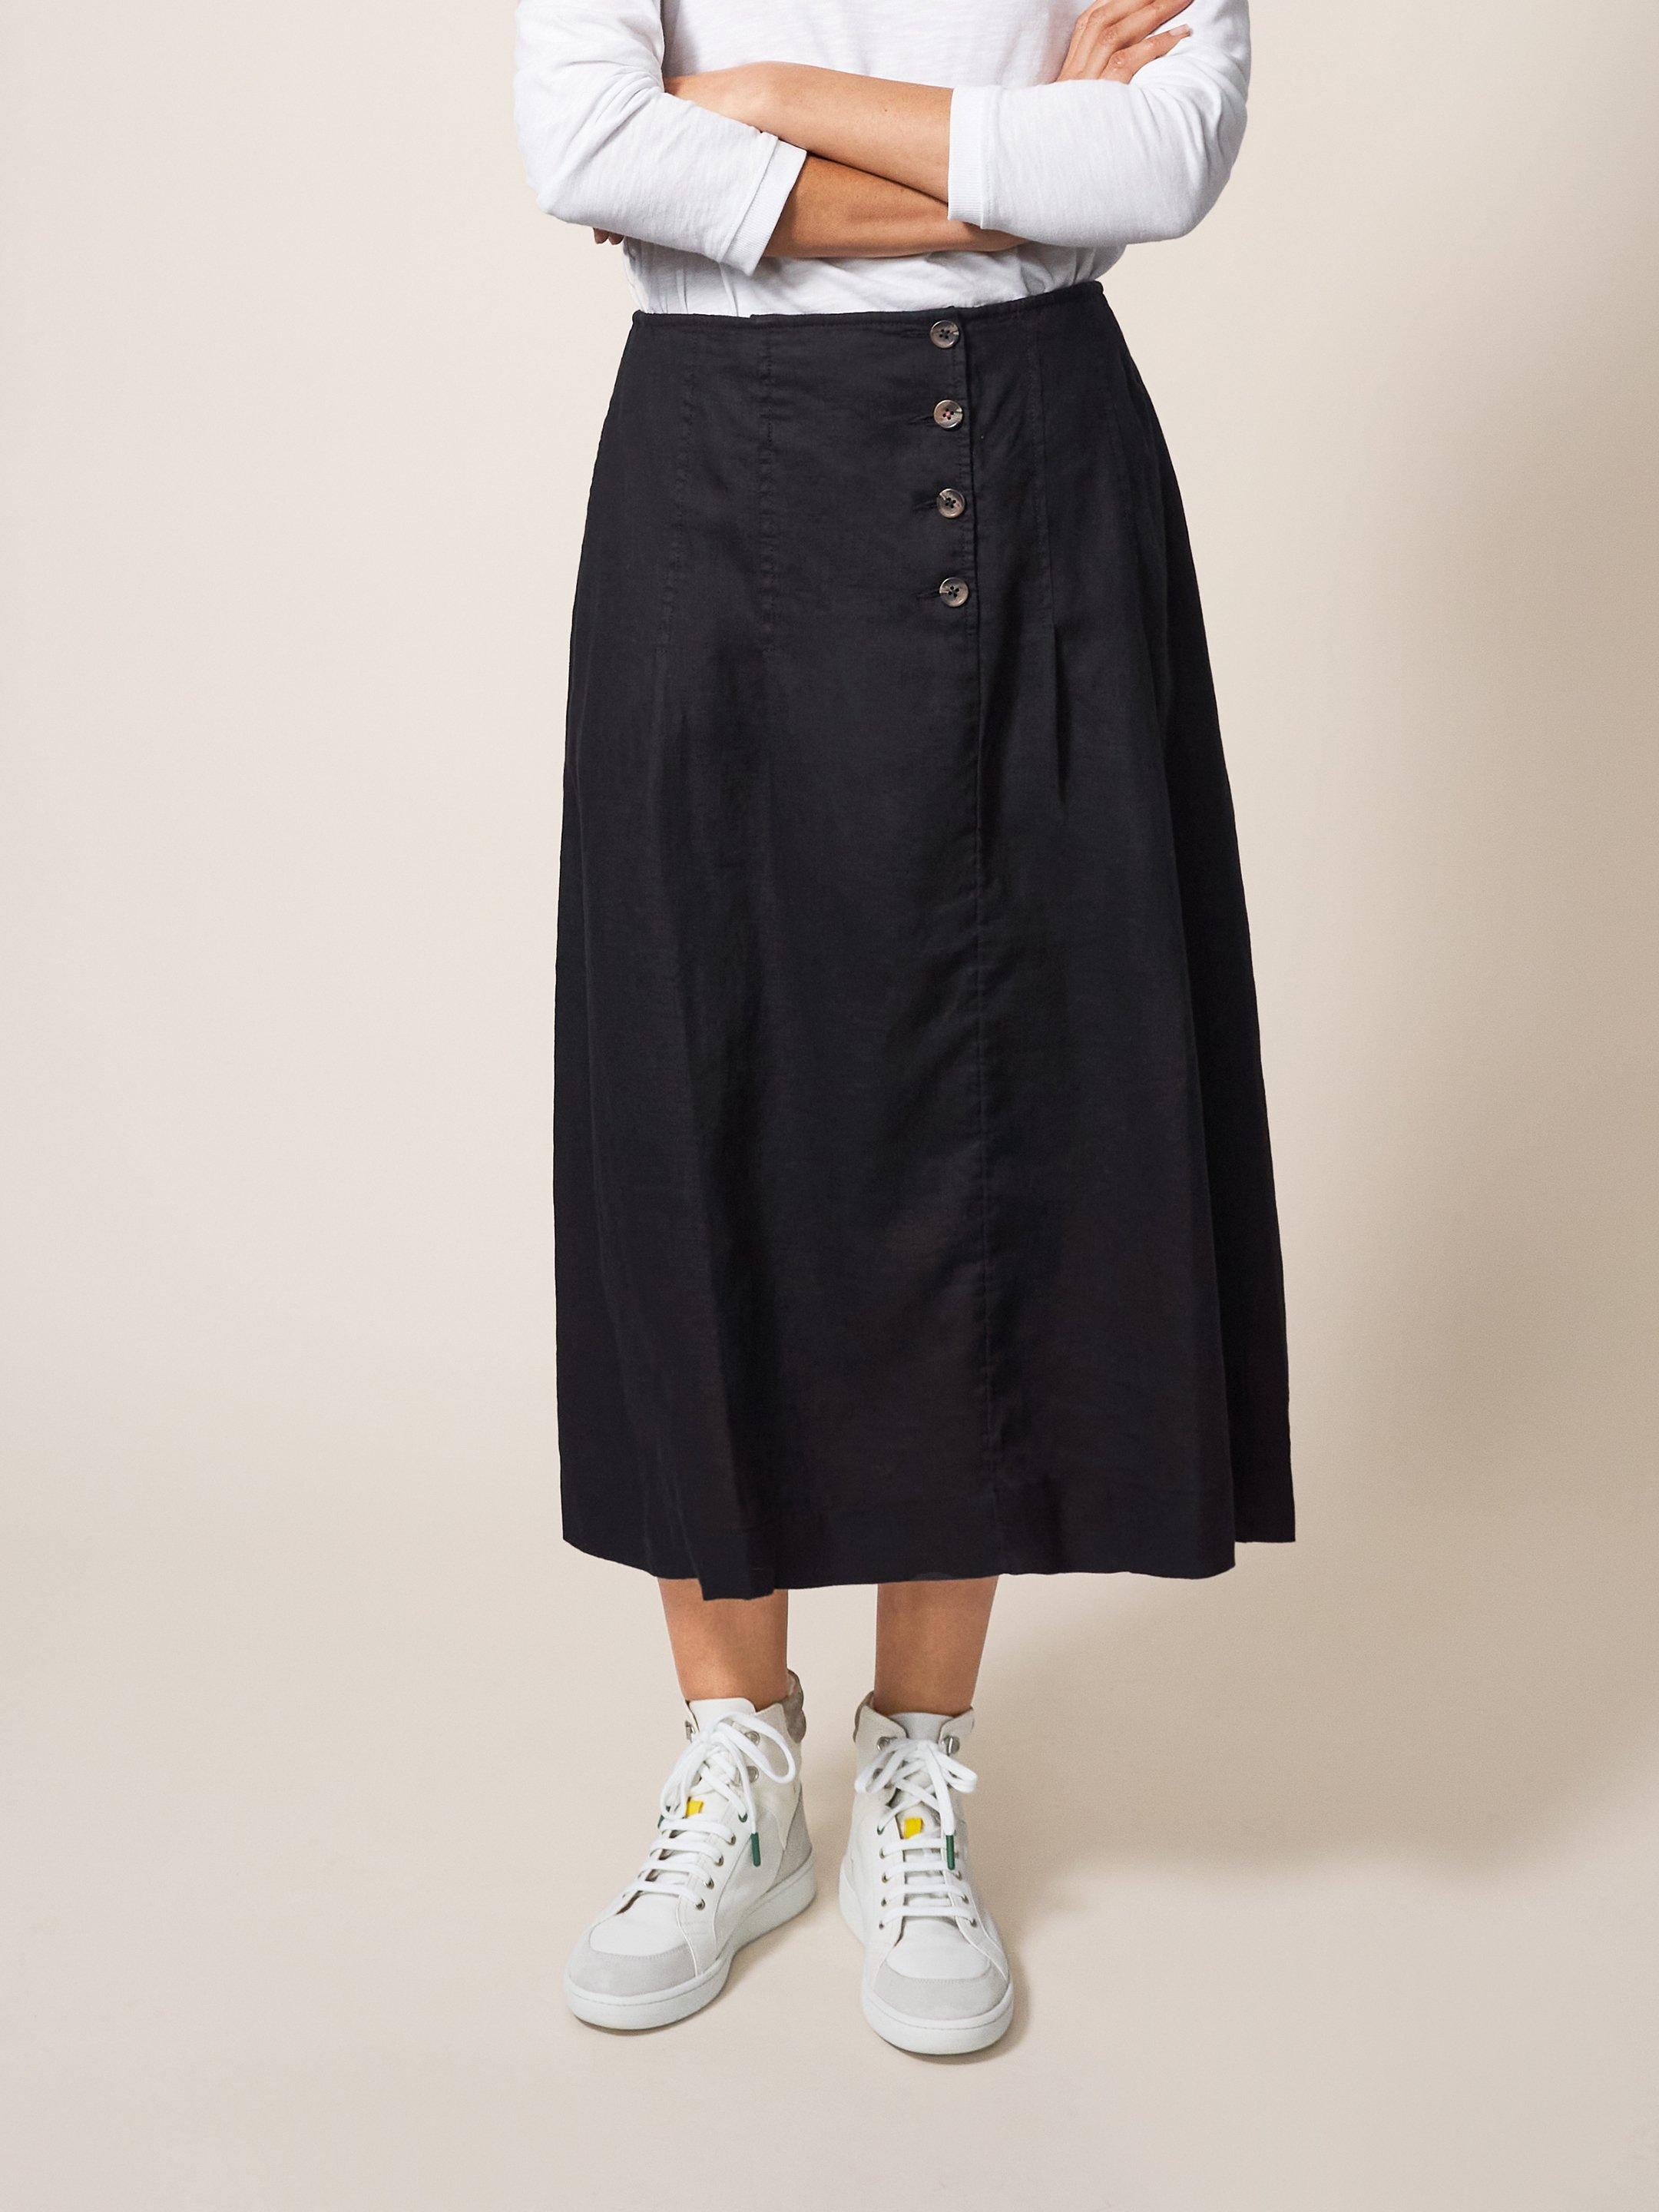 Ciara Linen Skirt in WASHED BLK - MODEL FRONT